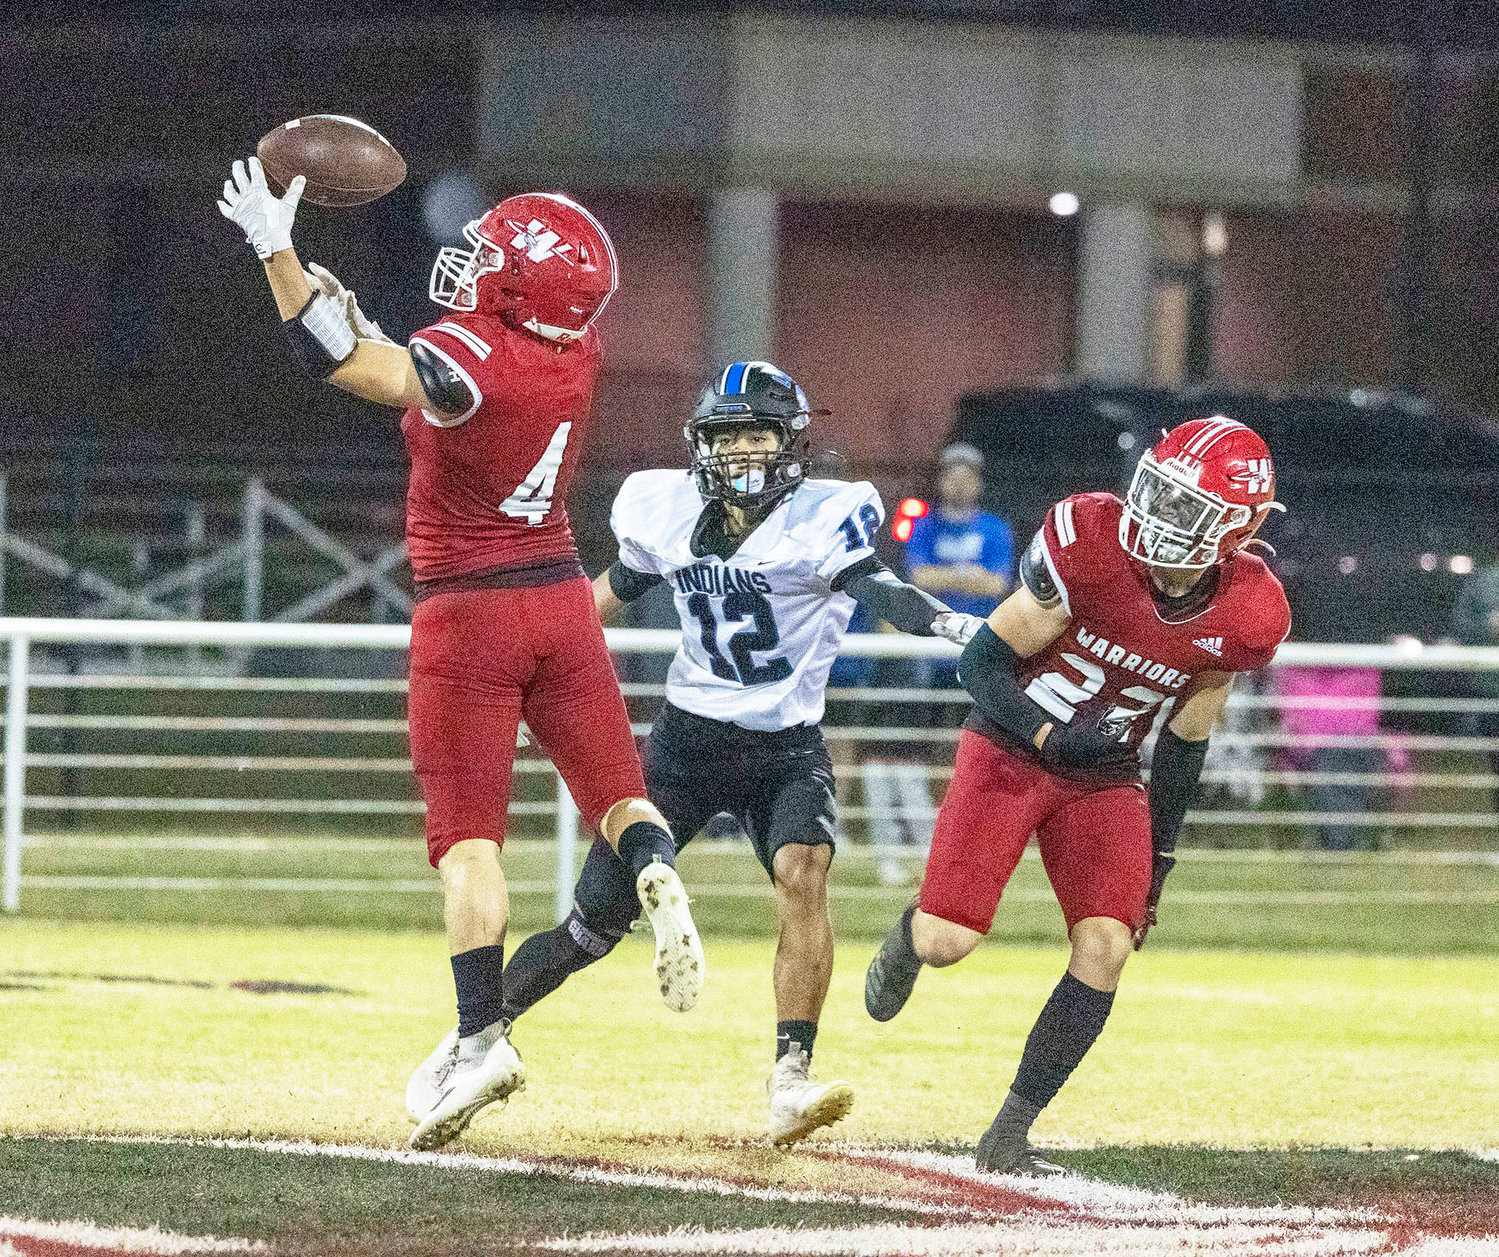 Washington junior Cole Beller (4) tips a ball Thursday night while Marlon Moore (22) provides help during the Warriors’ 47-0 win over Little Axe. The Warriors, 10-0, open the playoffs when they host Atoka Friday.